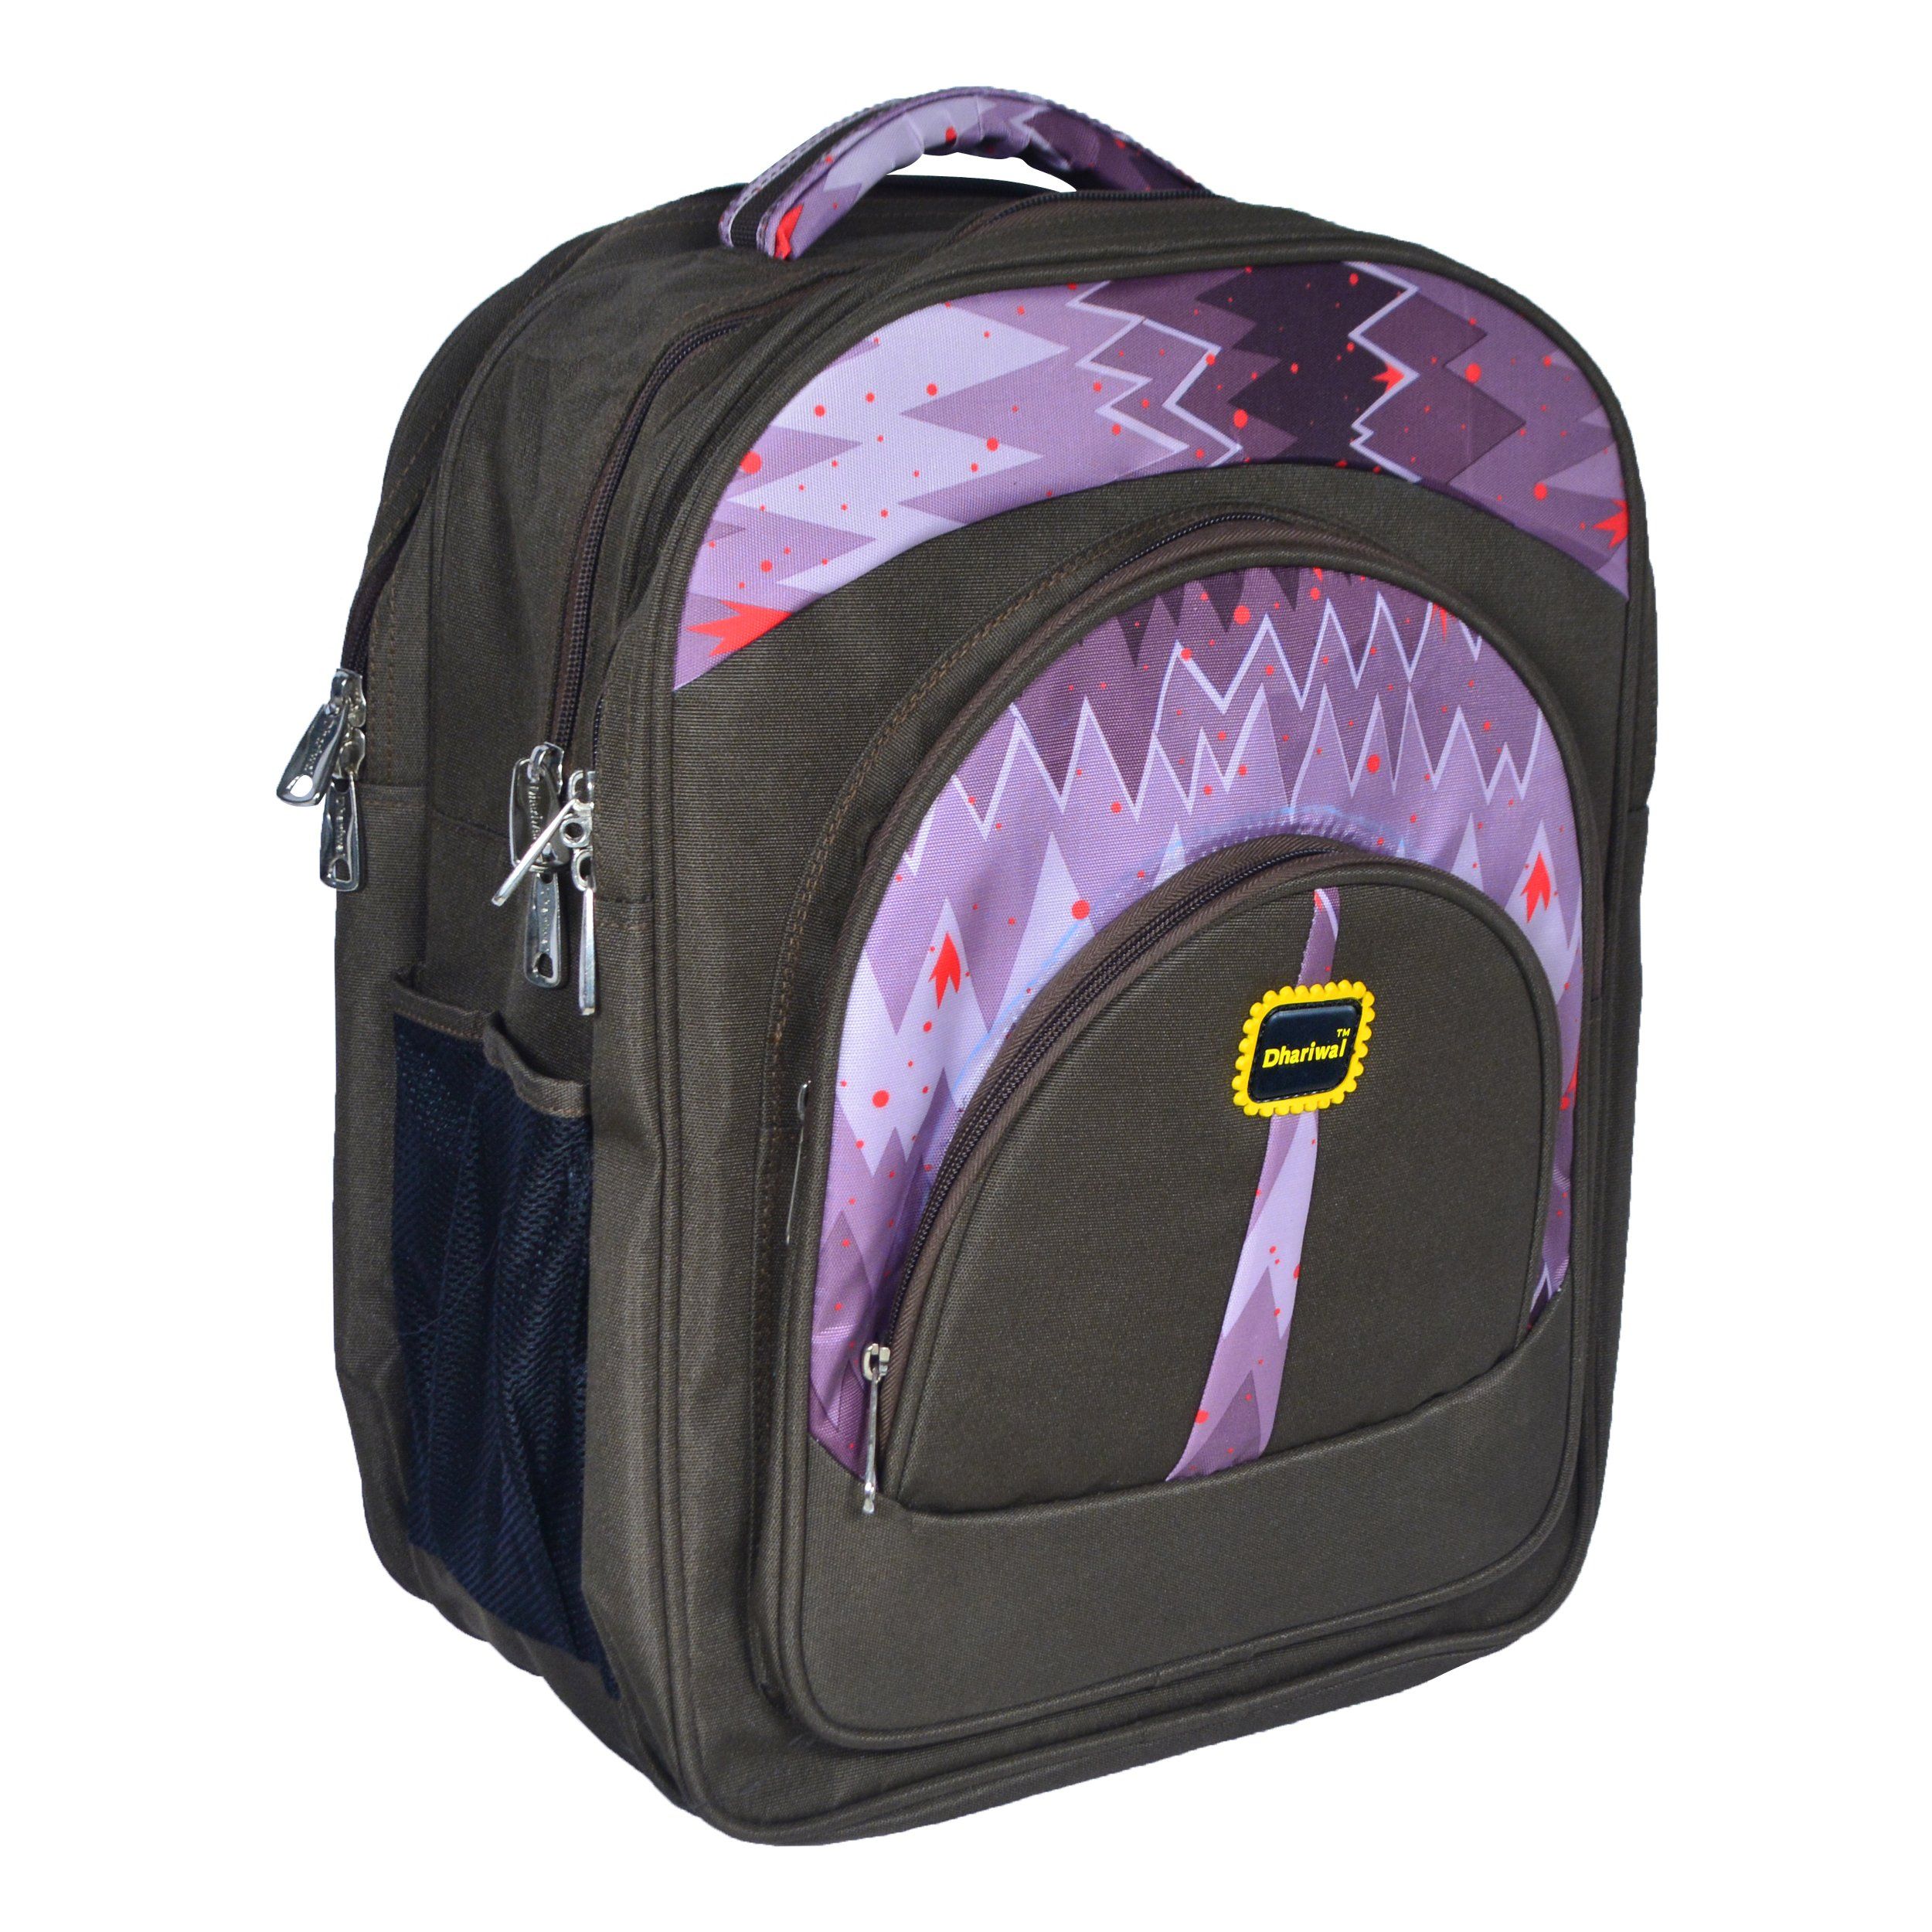 School Bag for 5th to 8th Standard  BIG